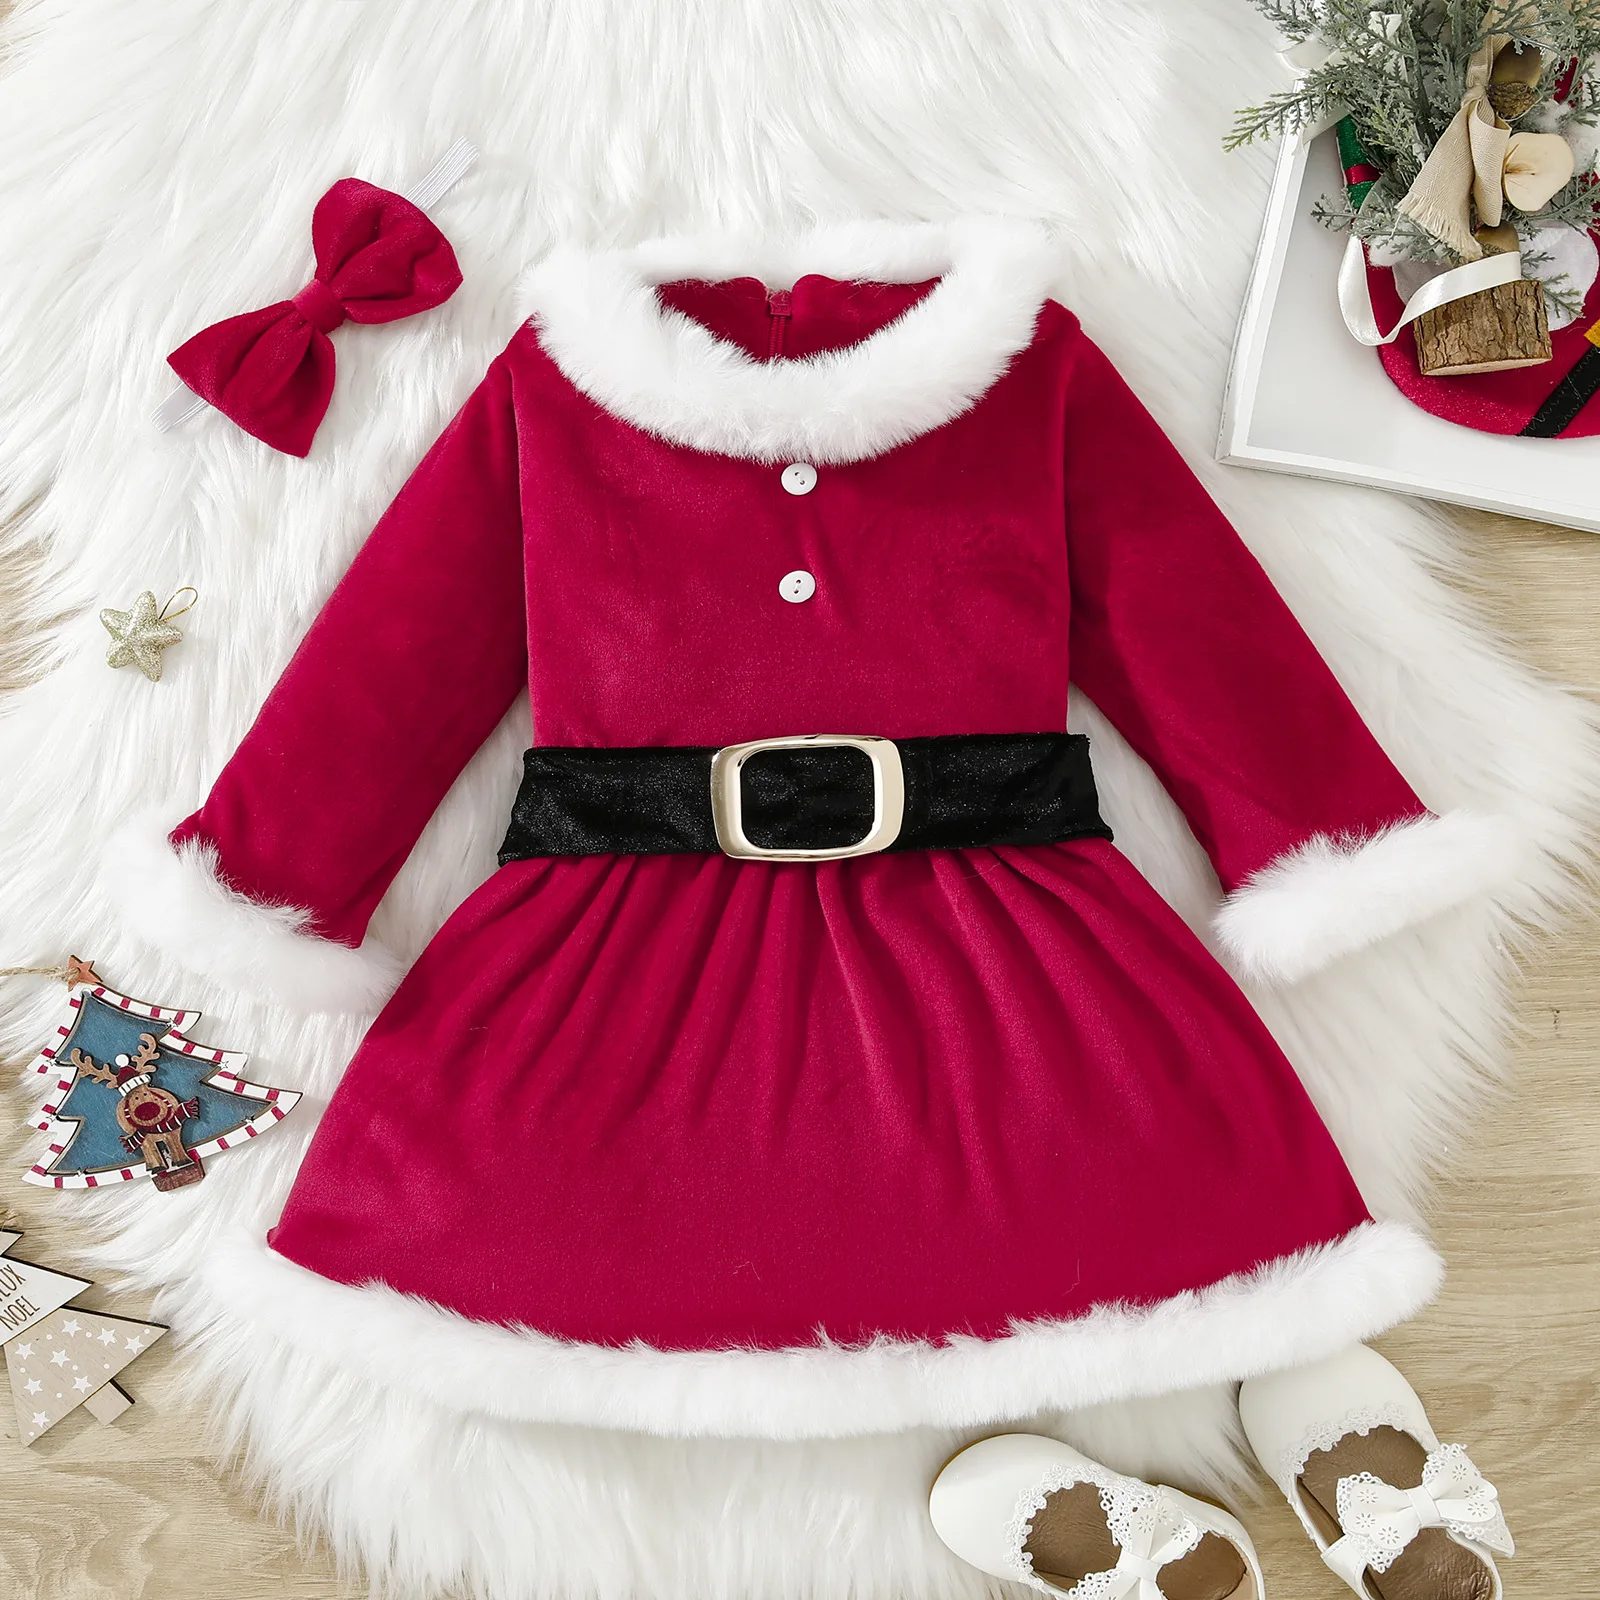 New arrival toddler girls casual dress princess Christmas girls clothes kids Festival boutique baby girls dresses